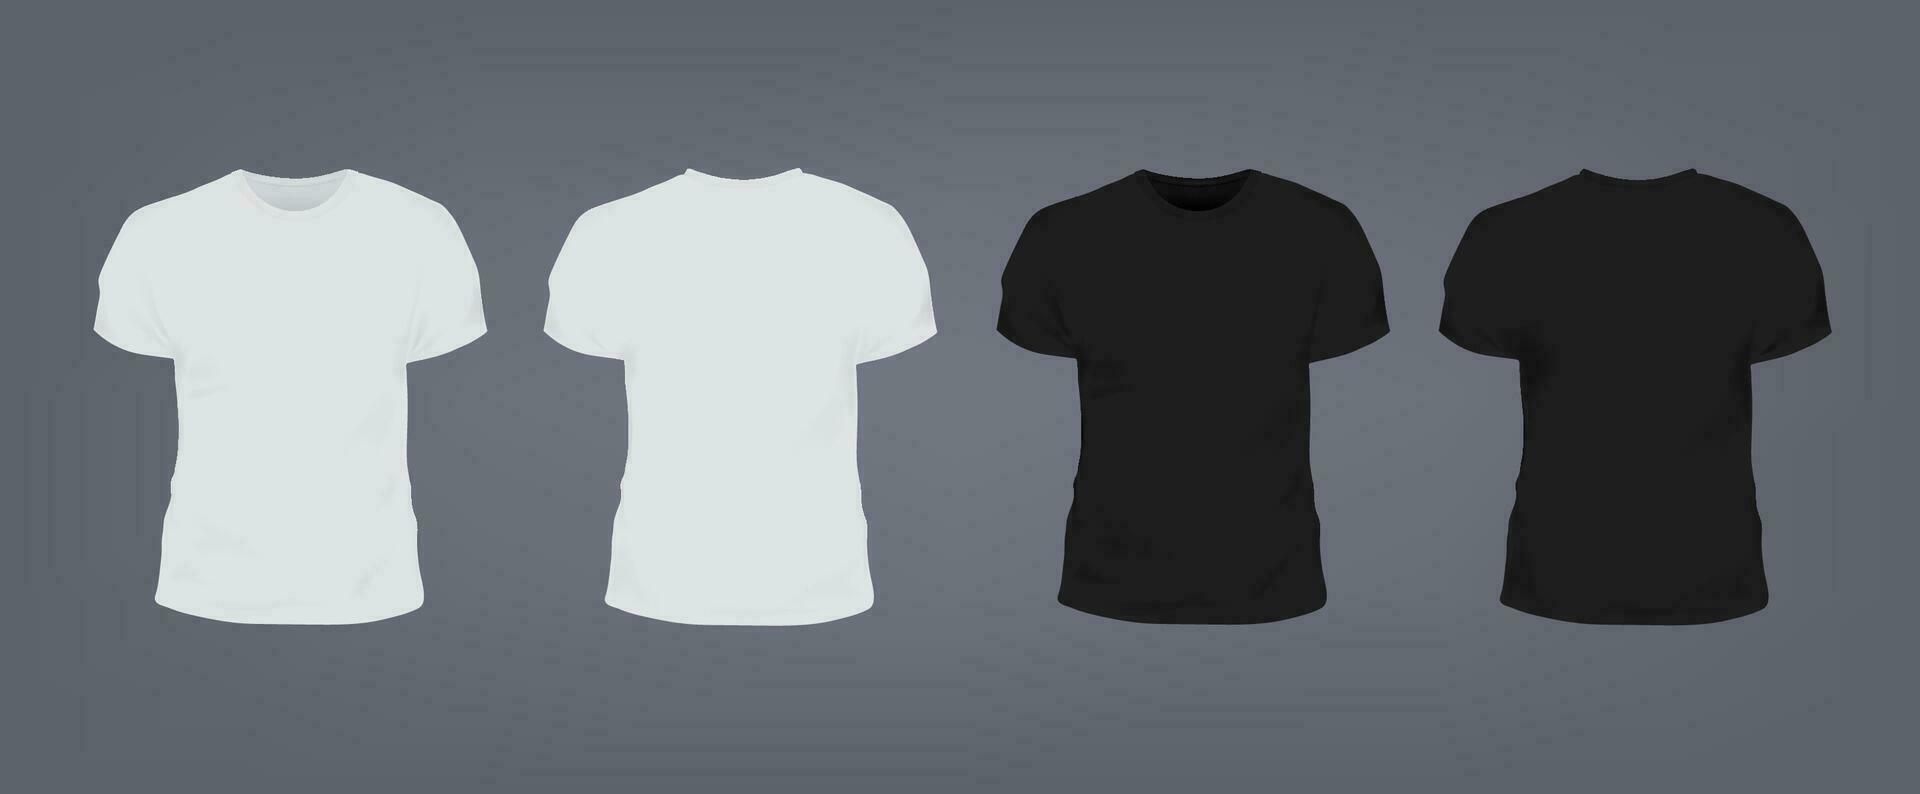 Set of realistic white and black unisex slim-fit t-shirt with round neckline. Front and back view. Vector illustration collection on gray background.